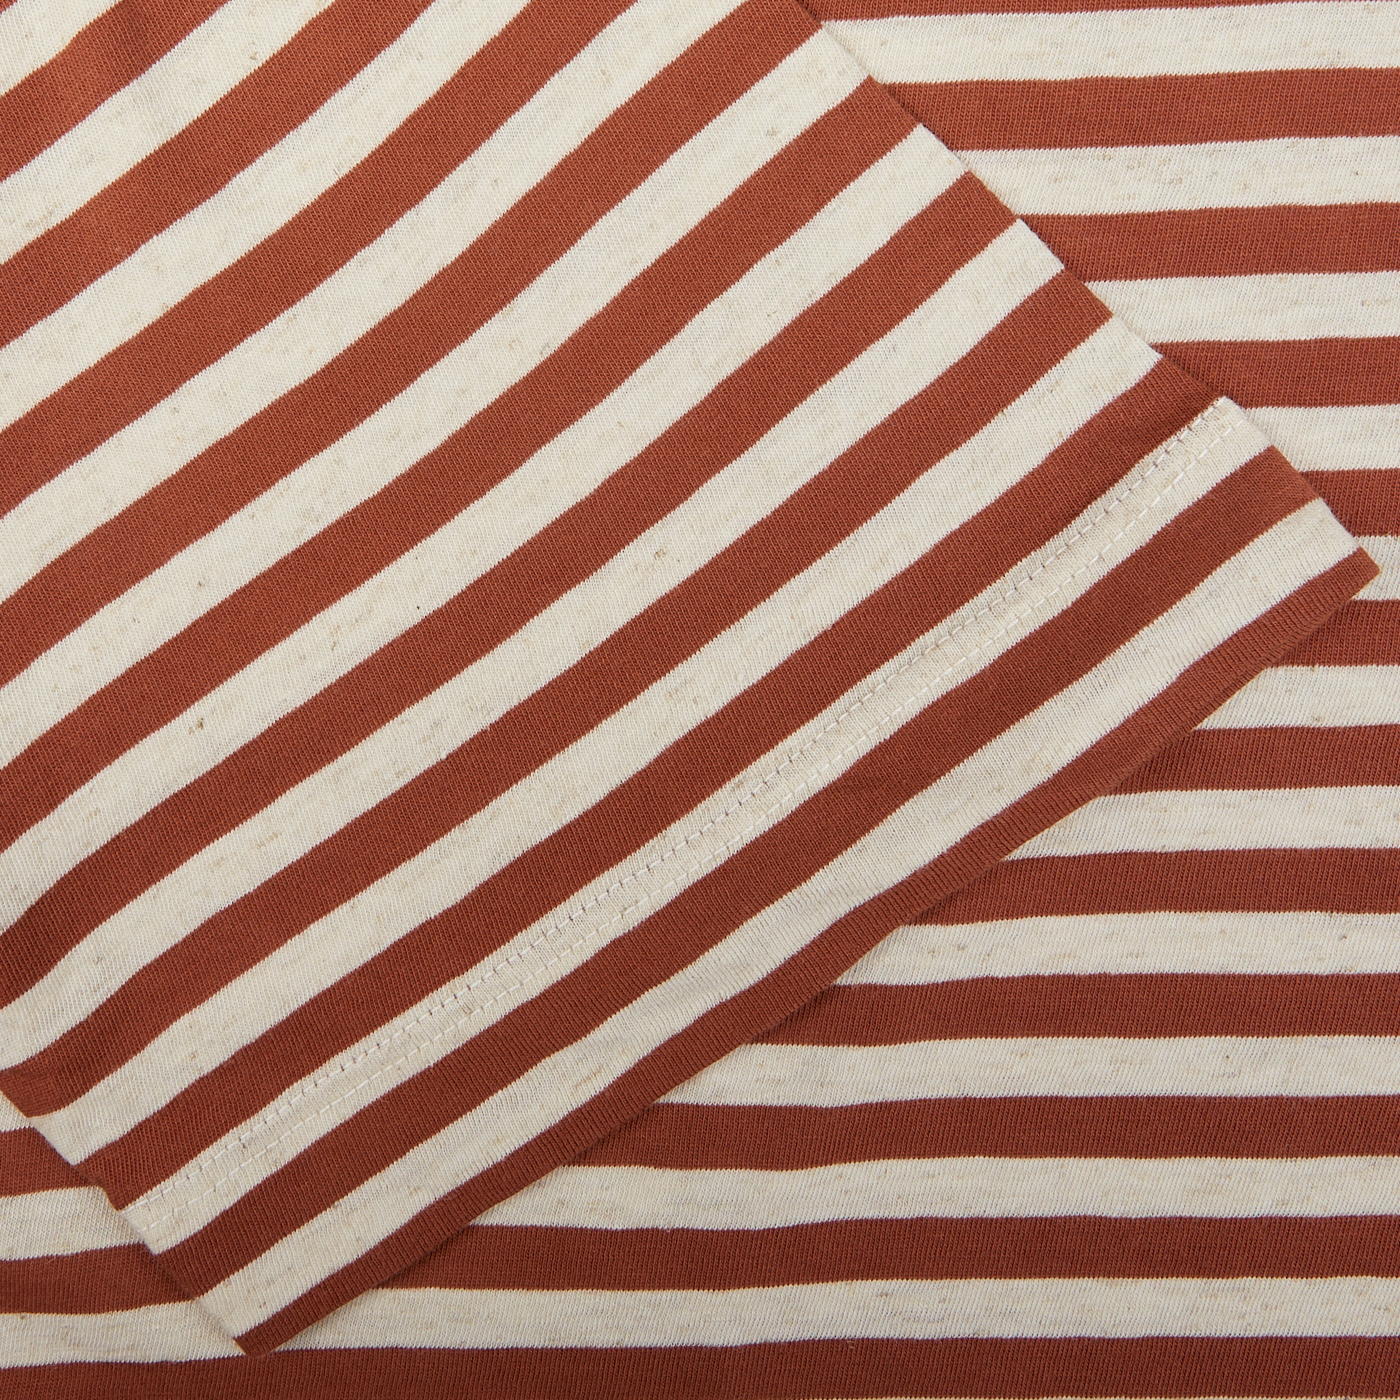 Brown and white striped cotton-linen blend fabric with folded corner. 
Product Name: Rust Brown Striped Cotton Linen T-Shirt
Brand Name: Massimo Alba